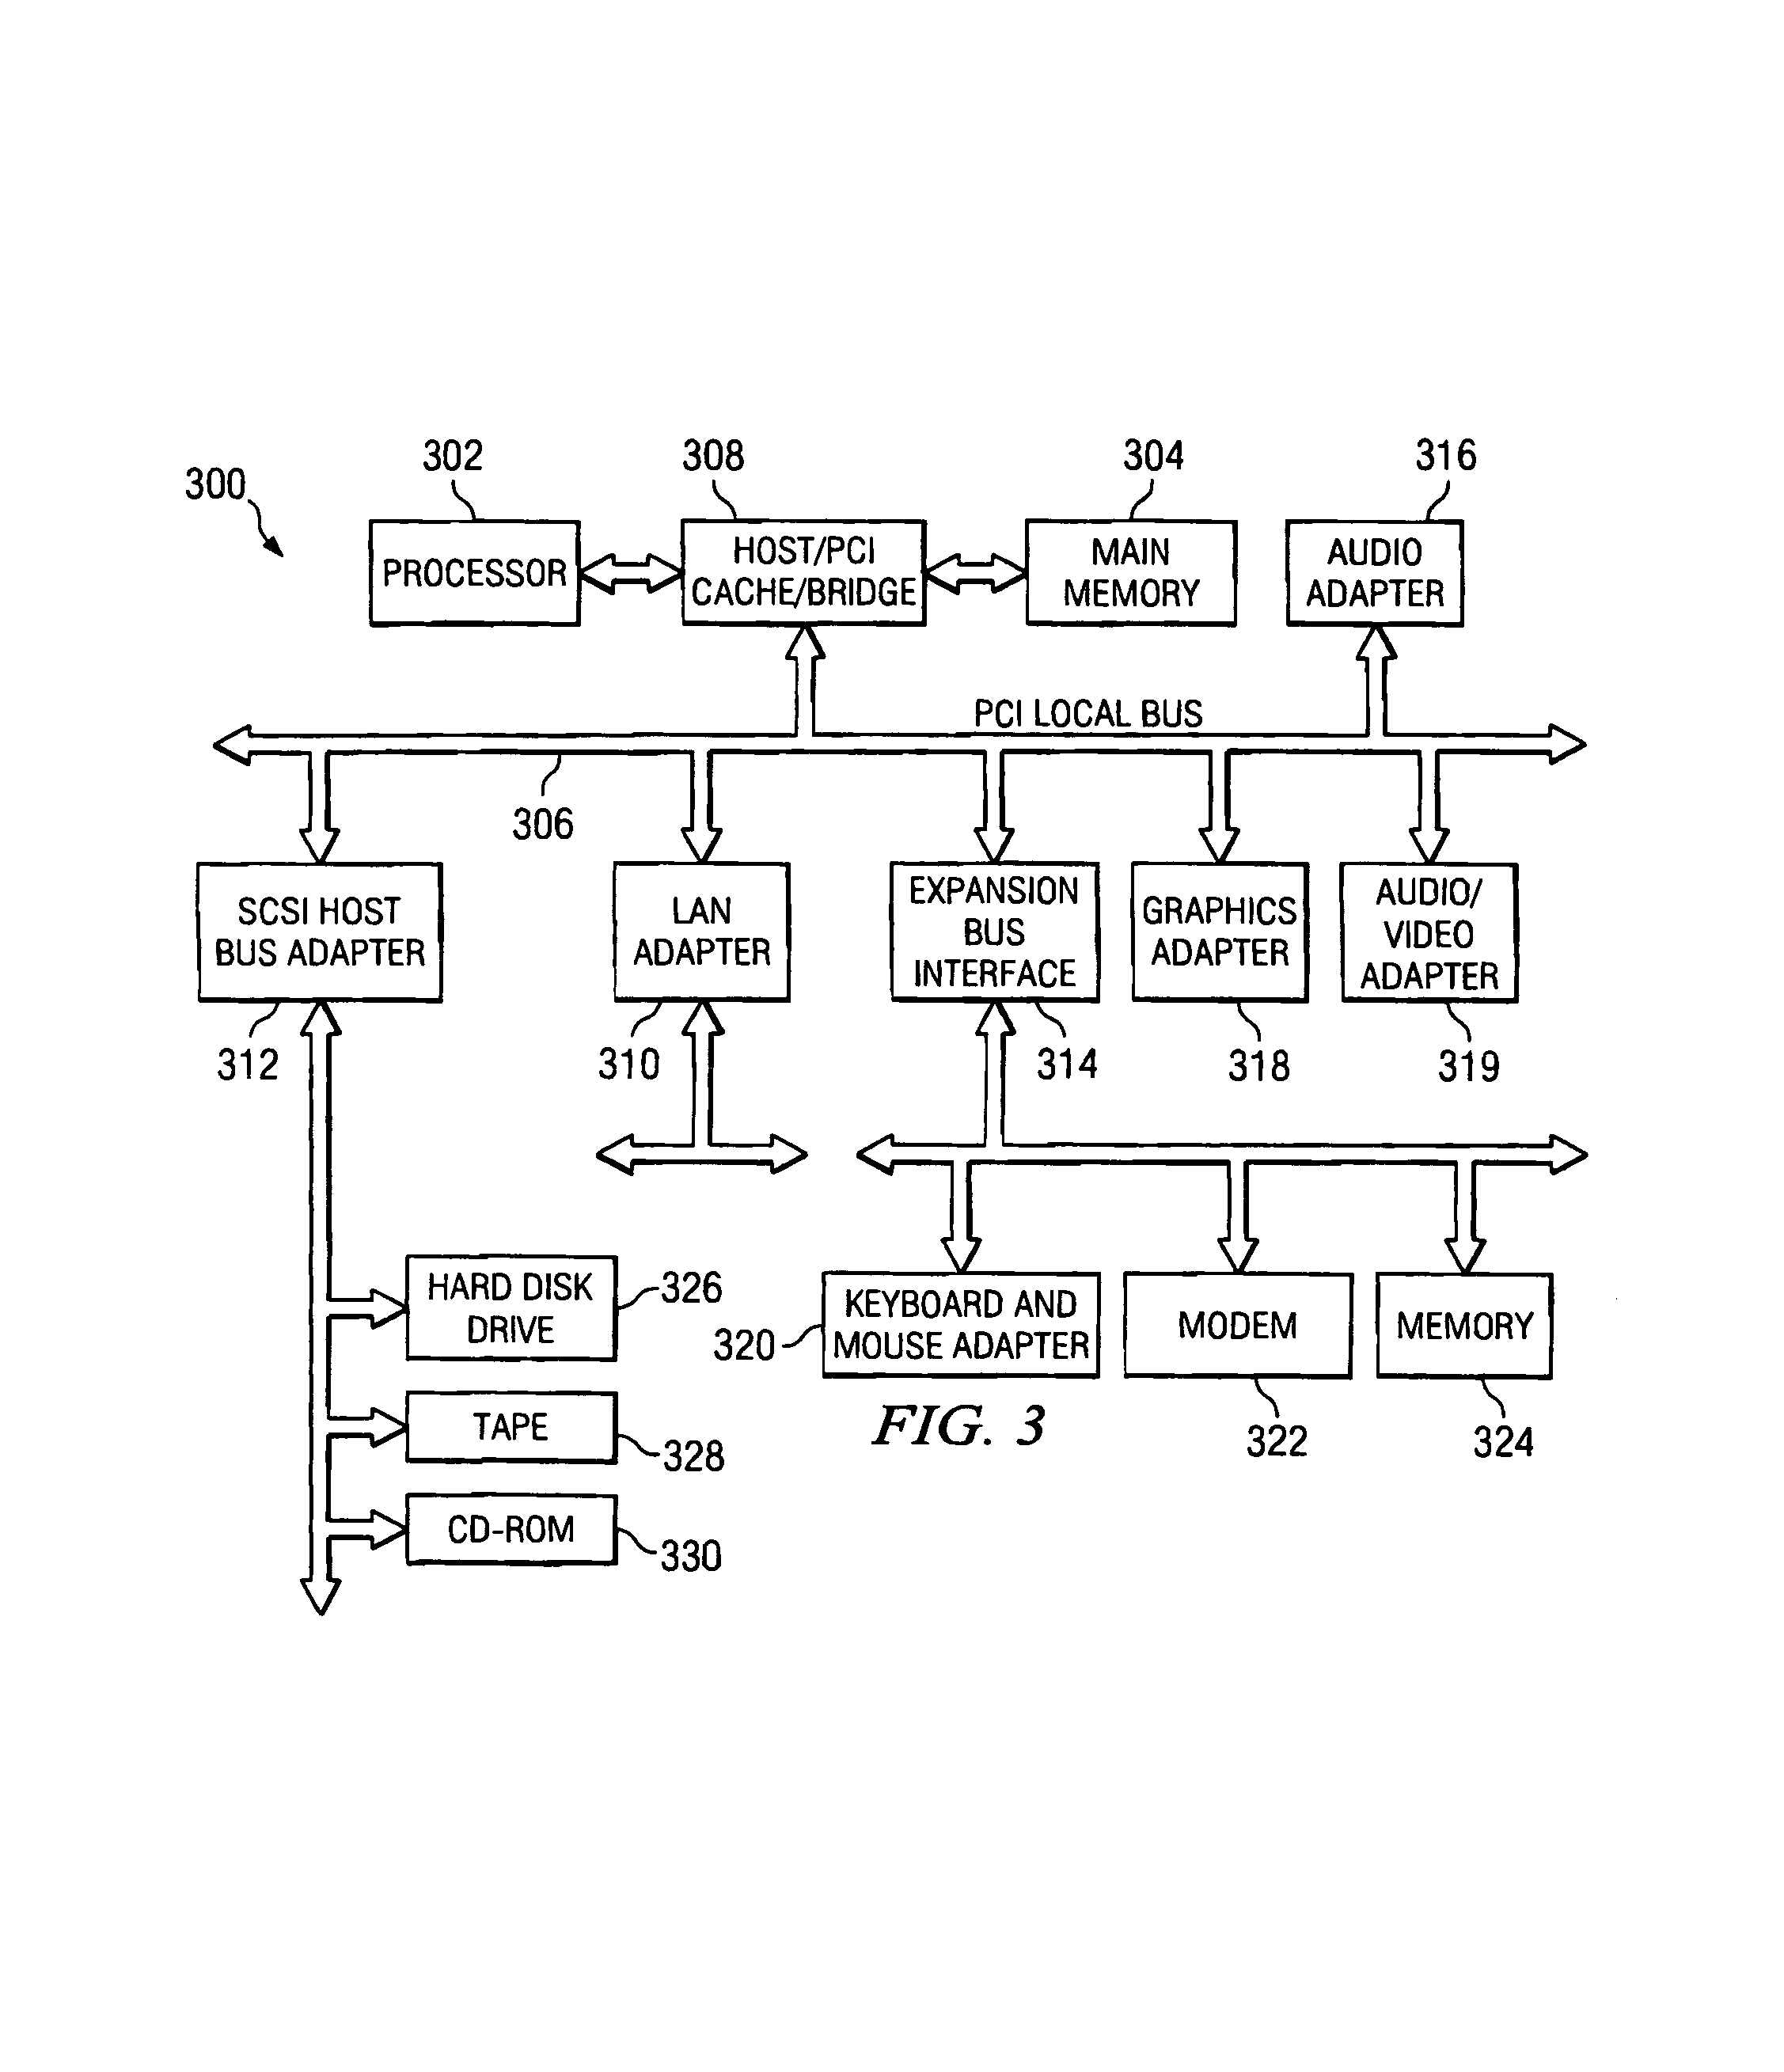 Method and apparatus for autonomic policy-based thermal management in a data processing system